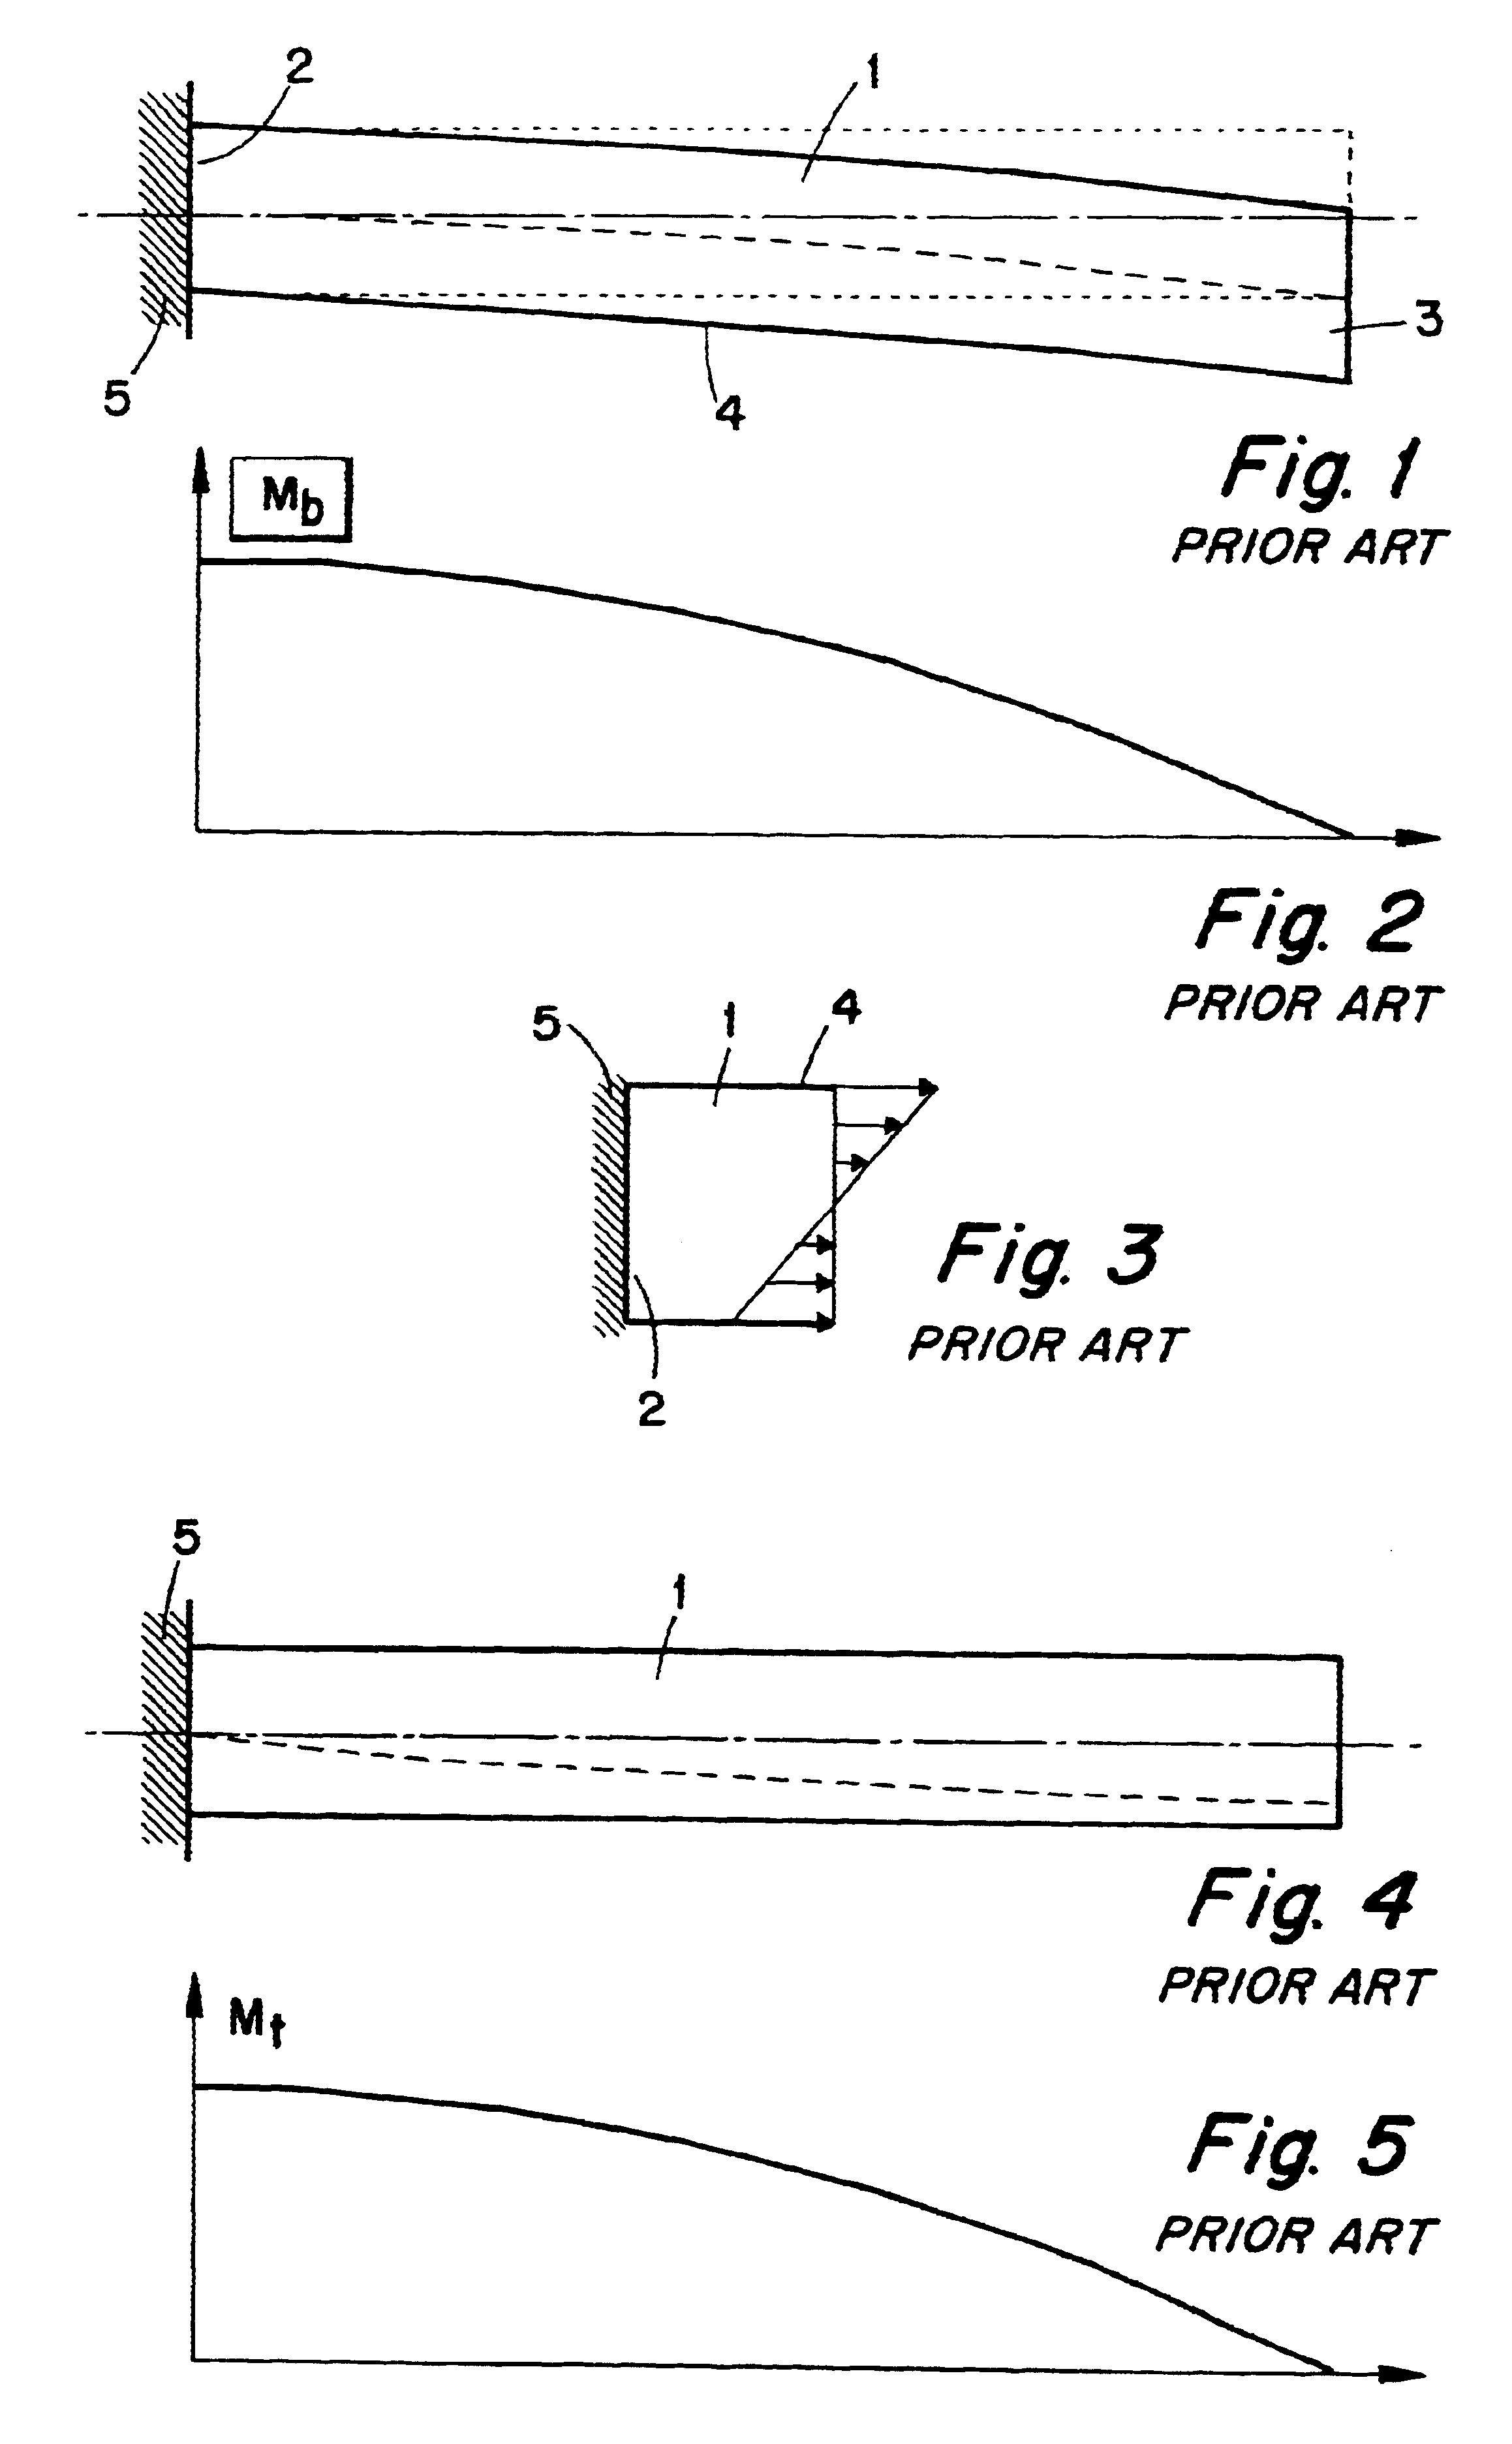 Active anti-vibration system for cutting tools utilizing piezo-electric elements